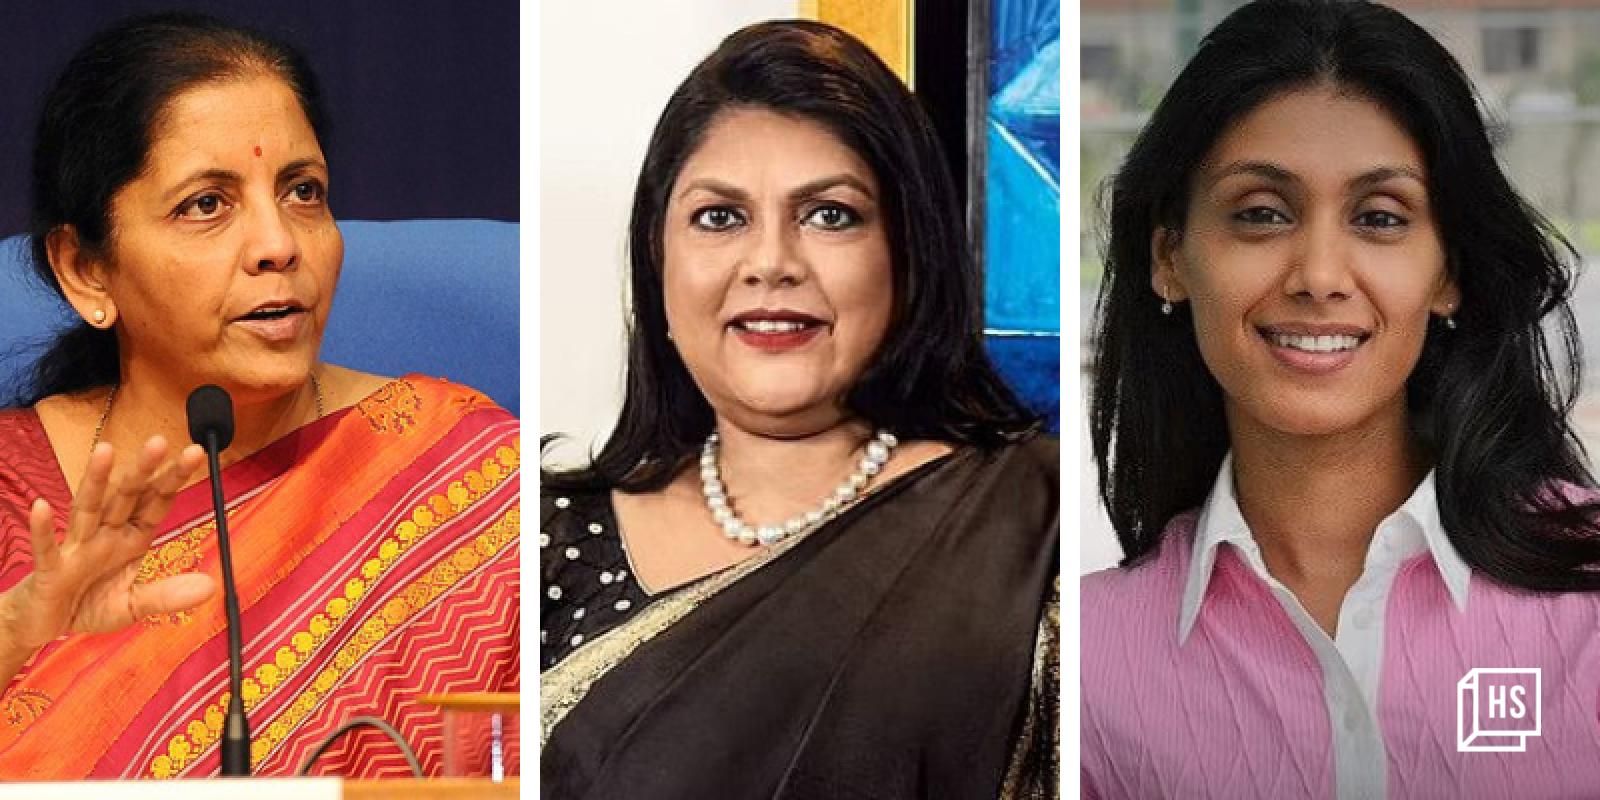 Nirmala Sitharaman, 5 other Indians in Forbes' World's 100 Most Powerful Women 2022 list

